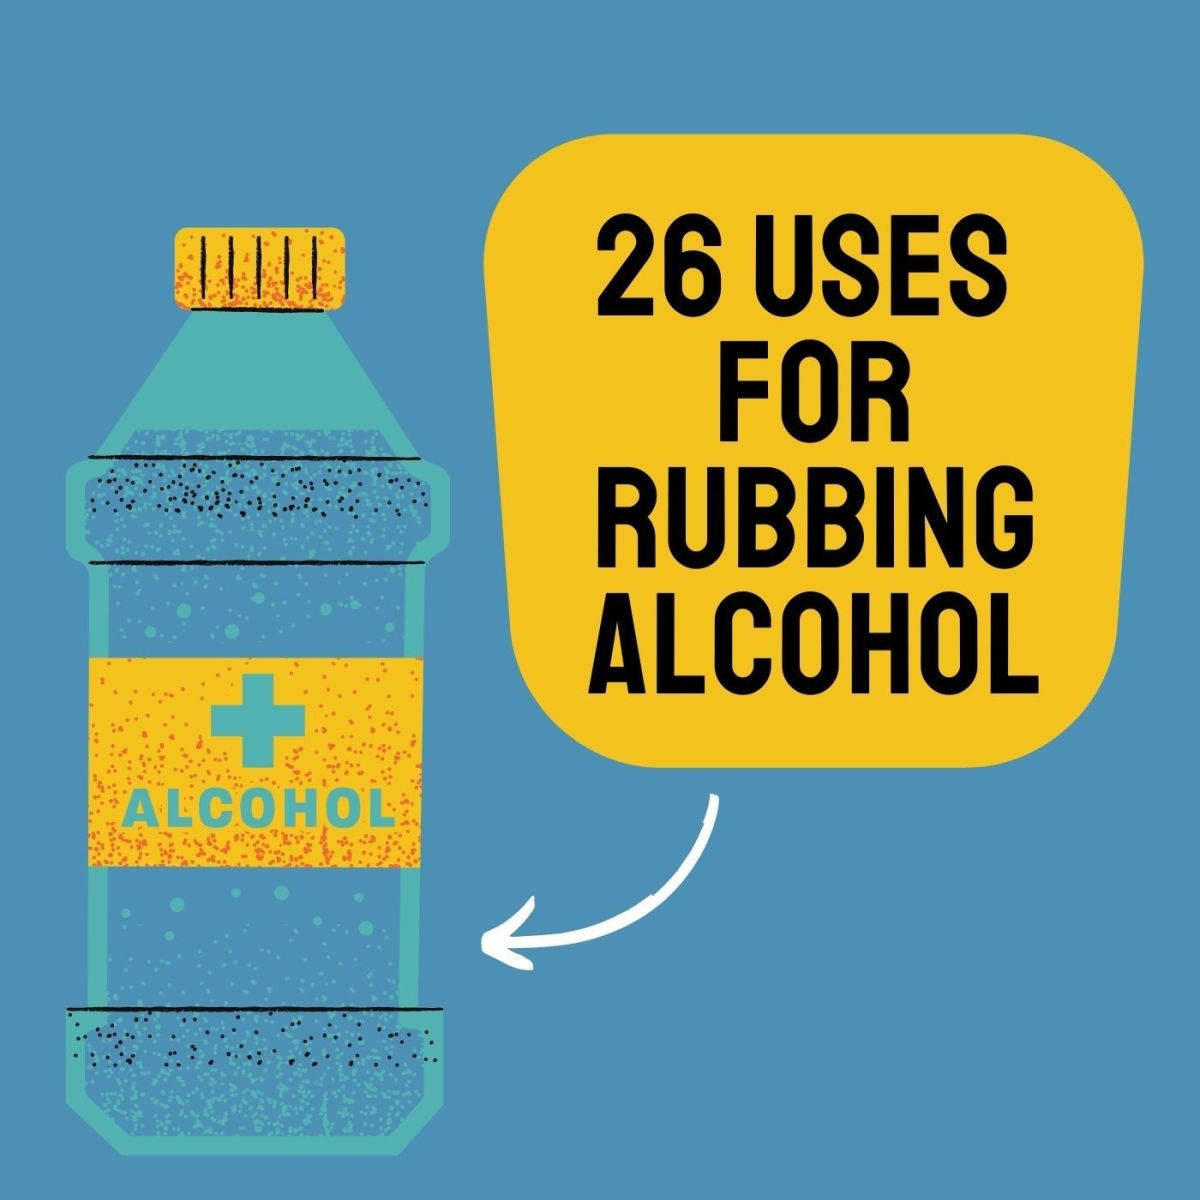 There are so many uses for rubbing alcohol!